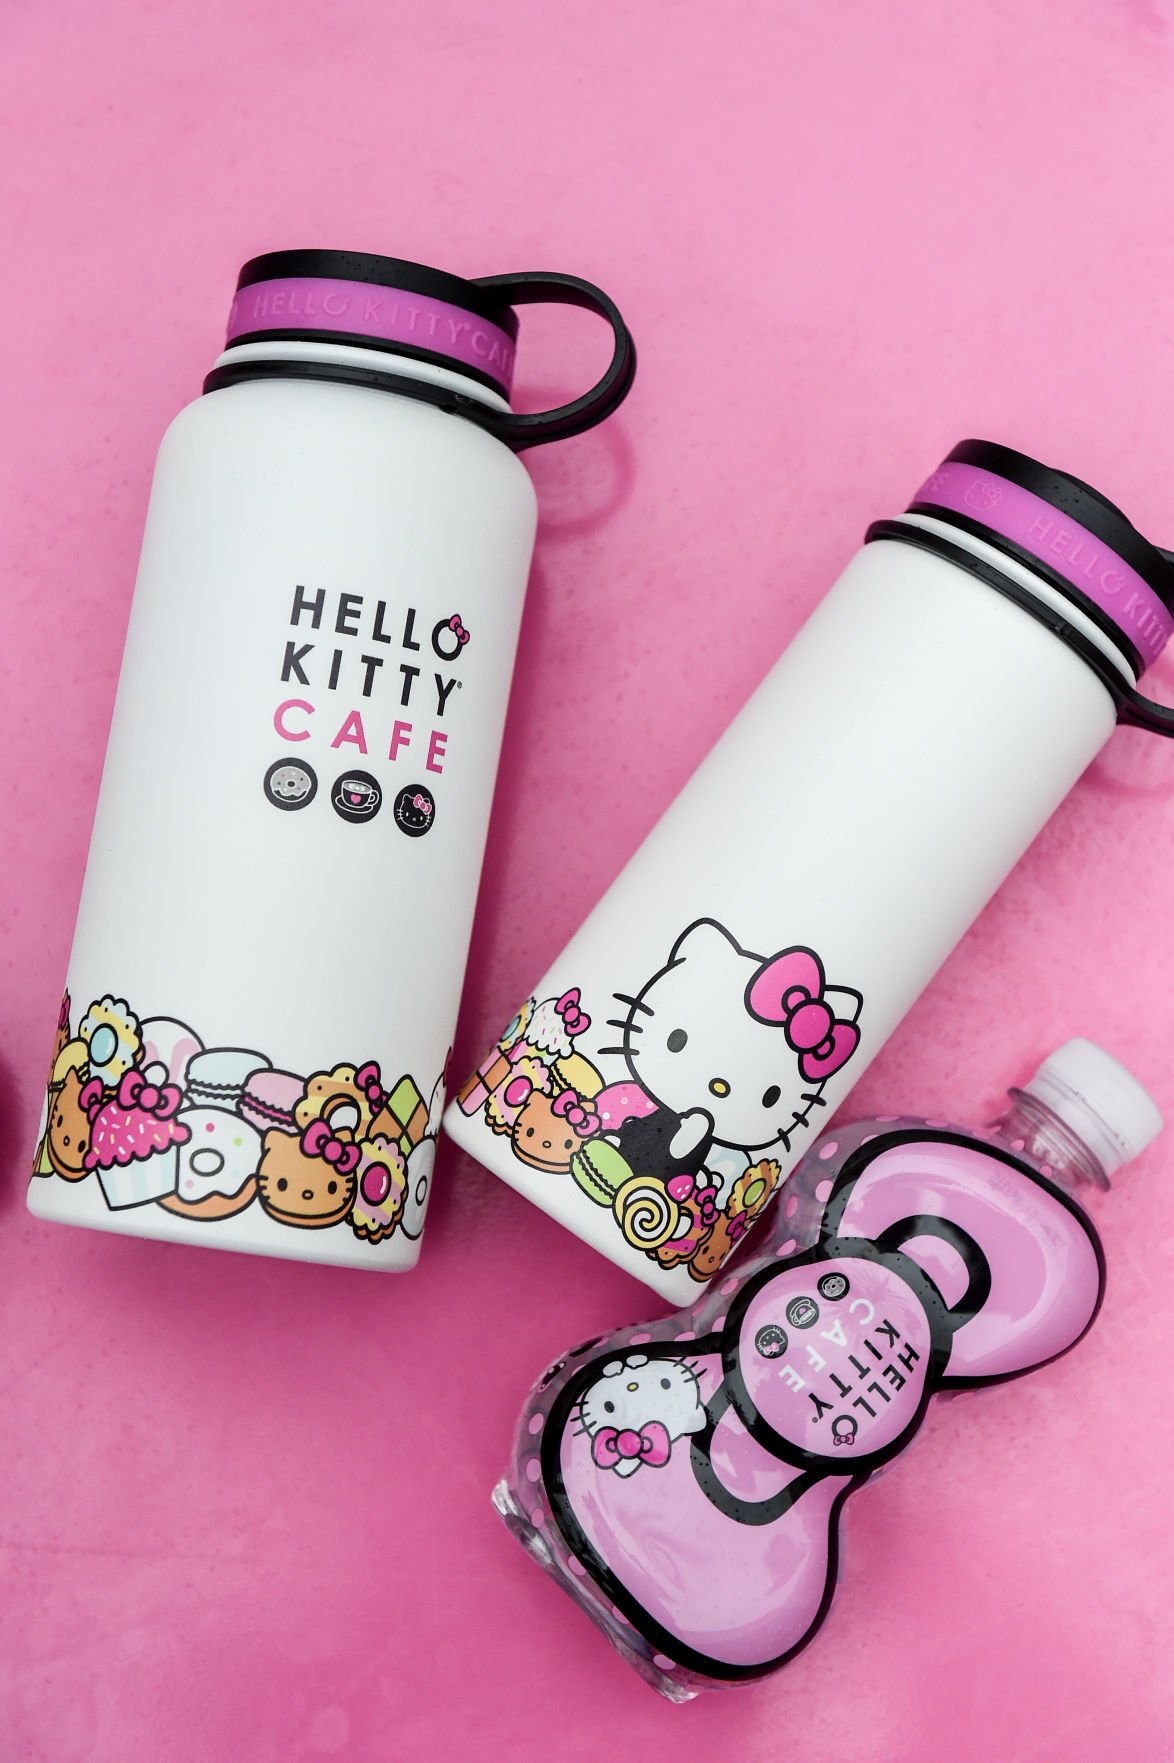 Get your sweets and nostalgia fix at the Hello  Kitty  Cafe  